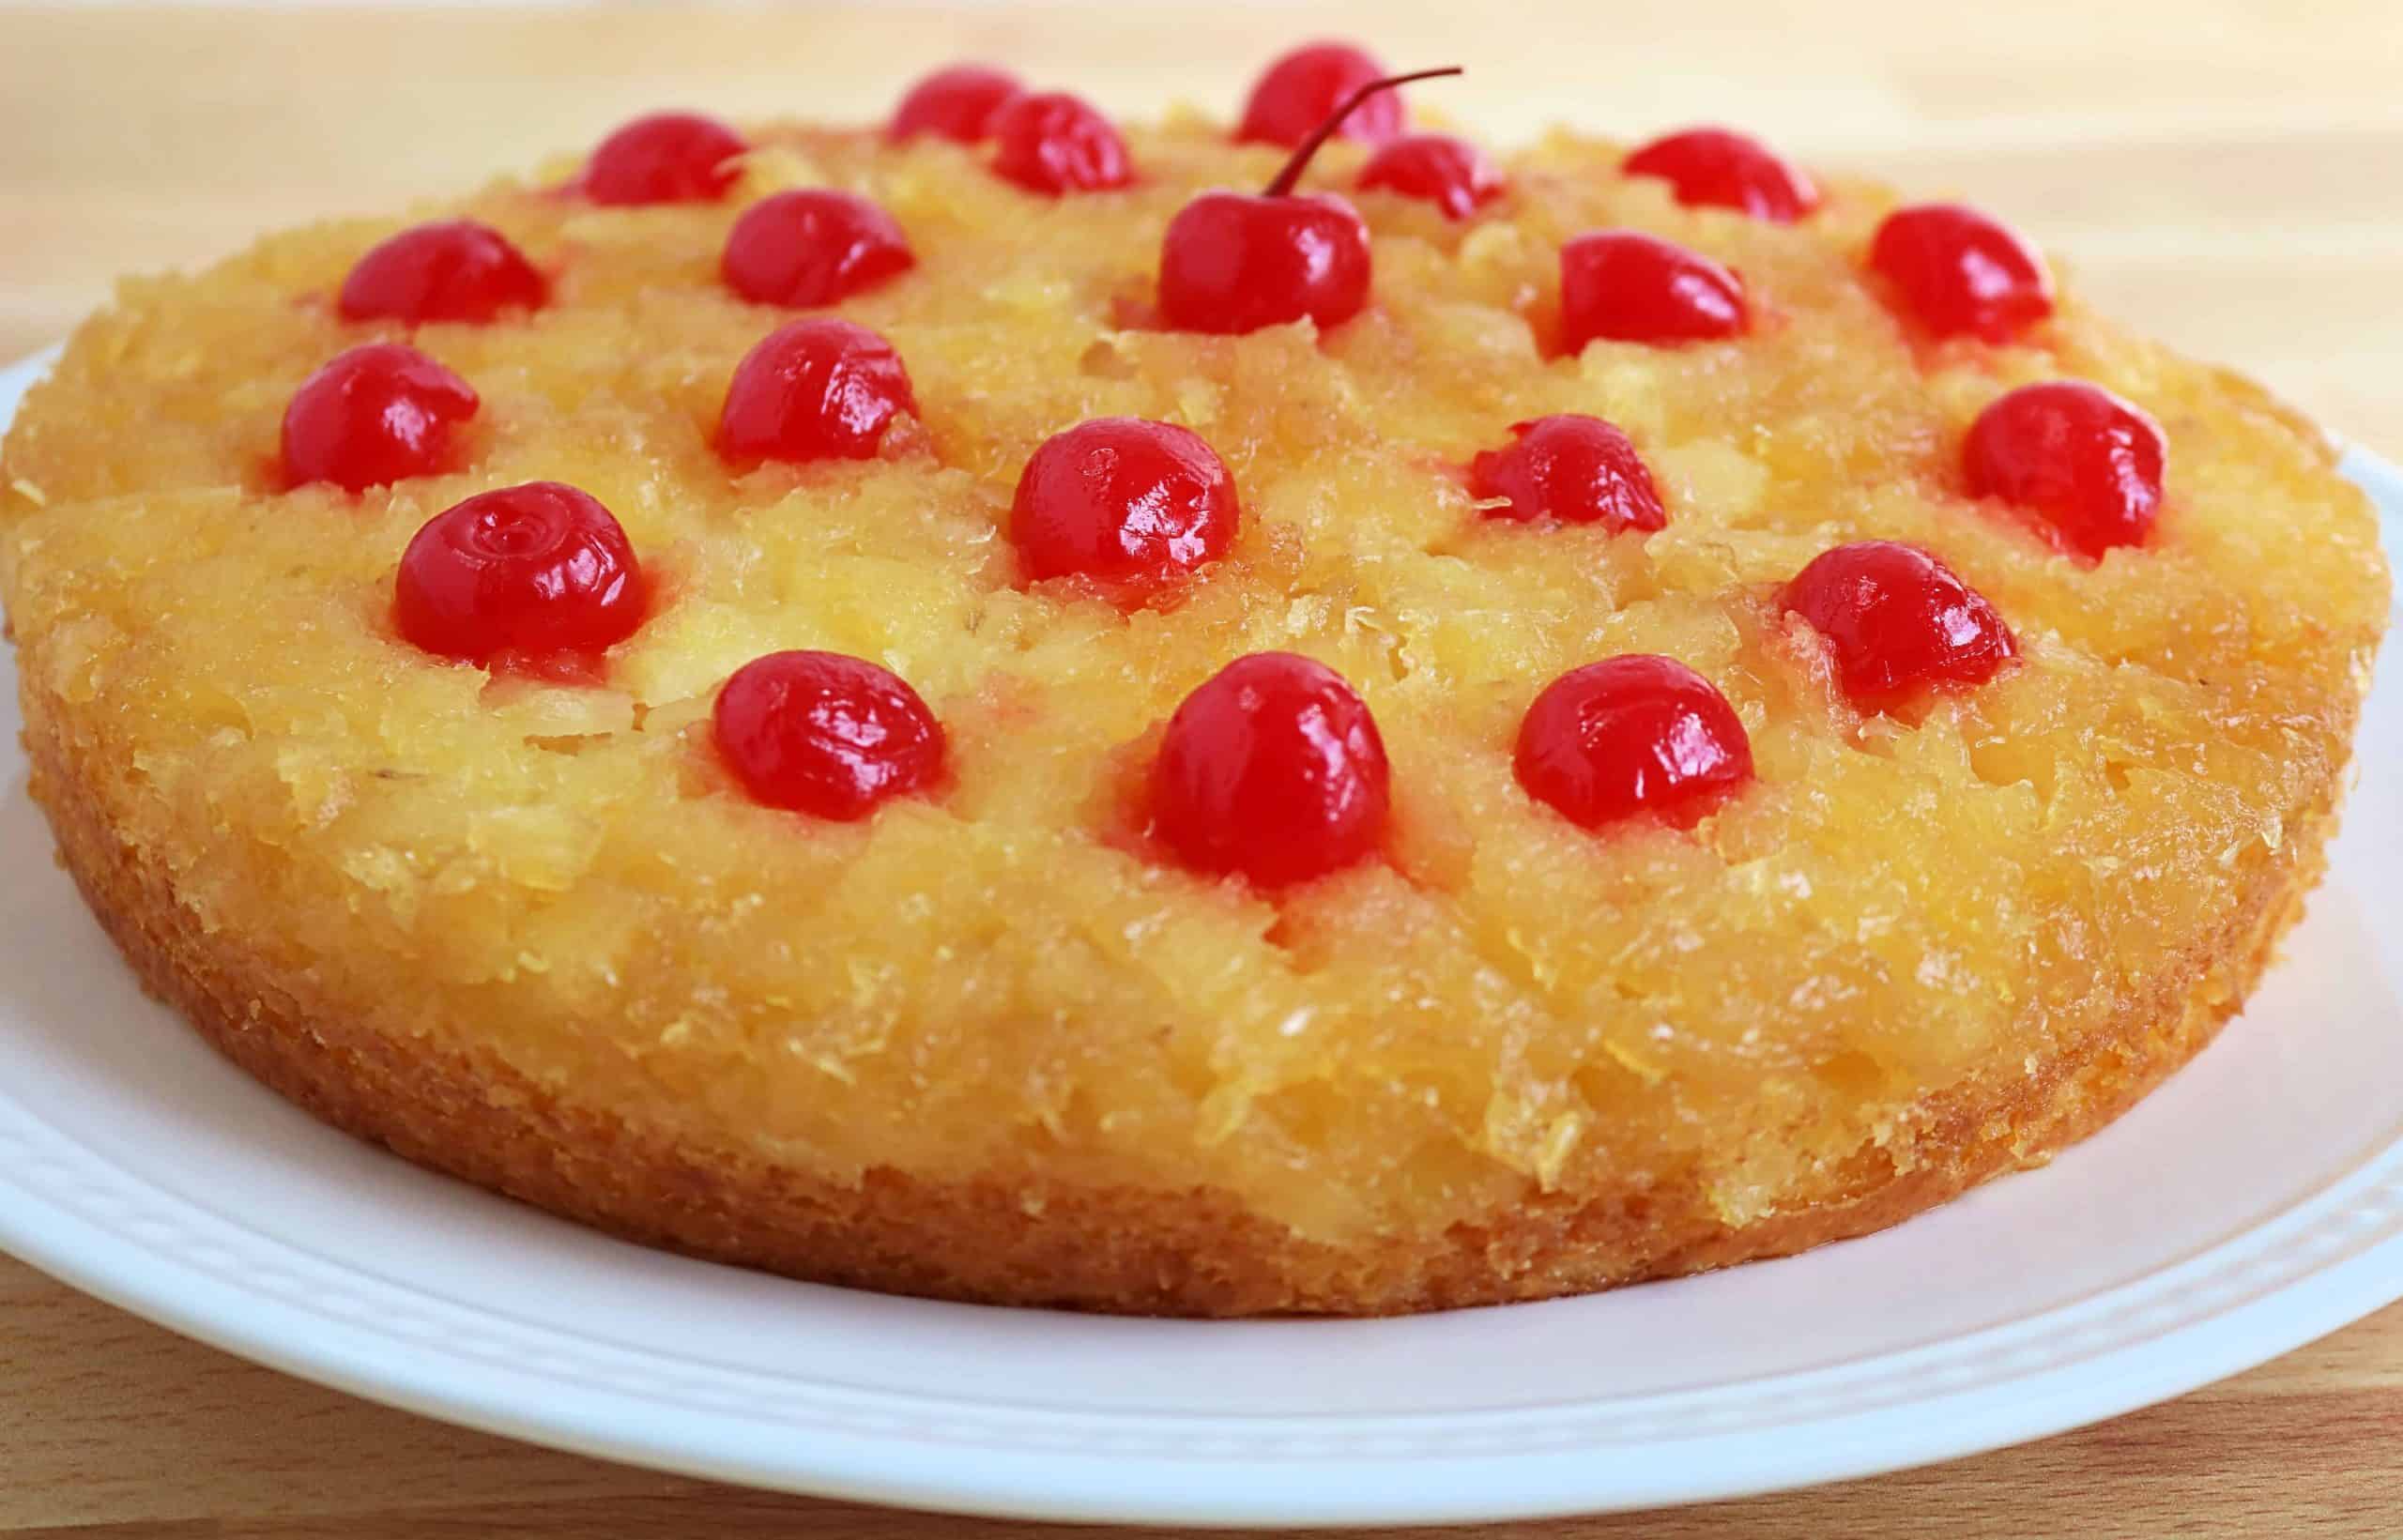 [View 25+] Duncan Hines Pineapple Upside Down Cake Recipe With Pudding